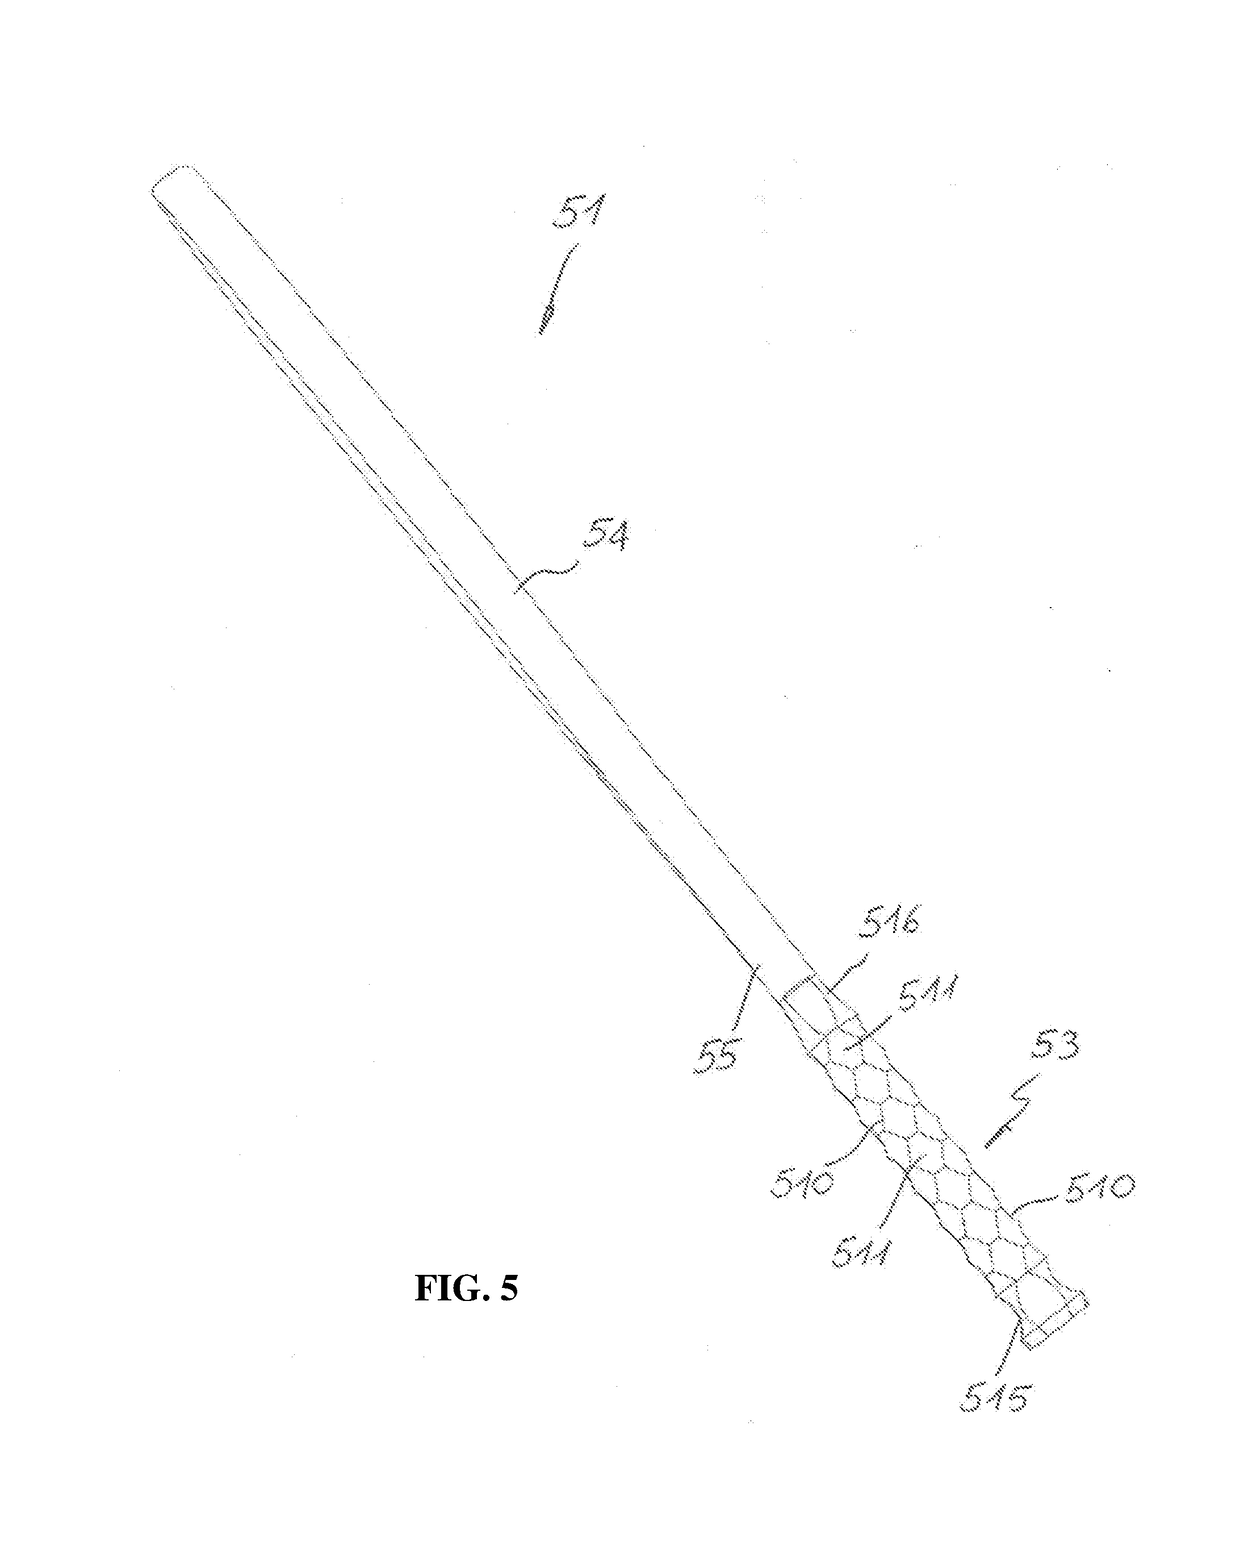 Handle for sports or work equipment and equipment comprising the handle